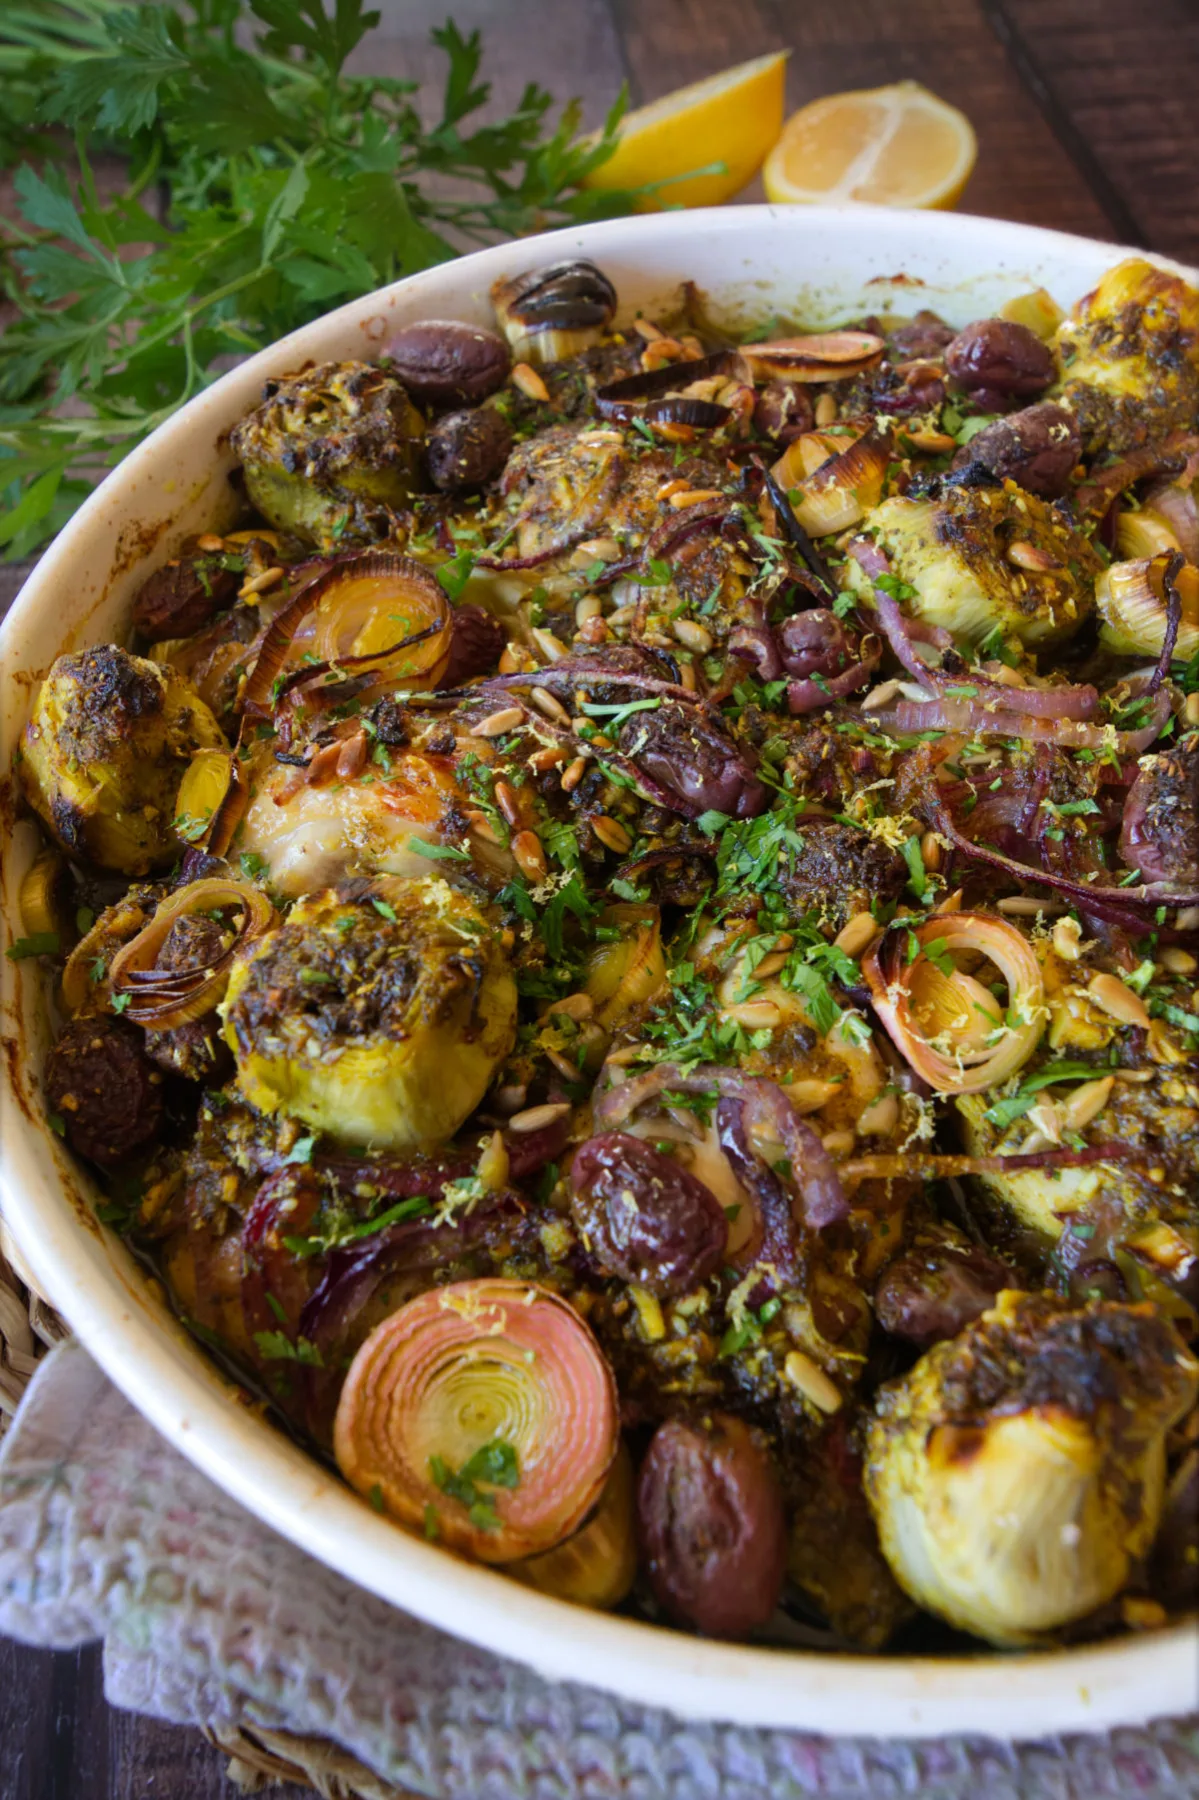 A large dish of Za'atar chicken with leeks, and roasted artichoke hearts.